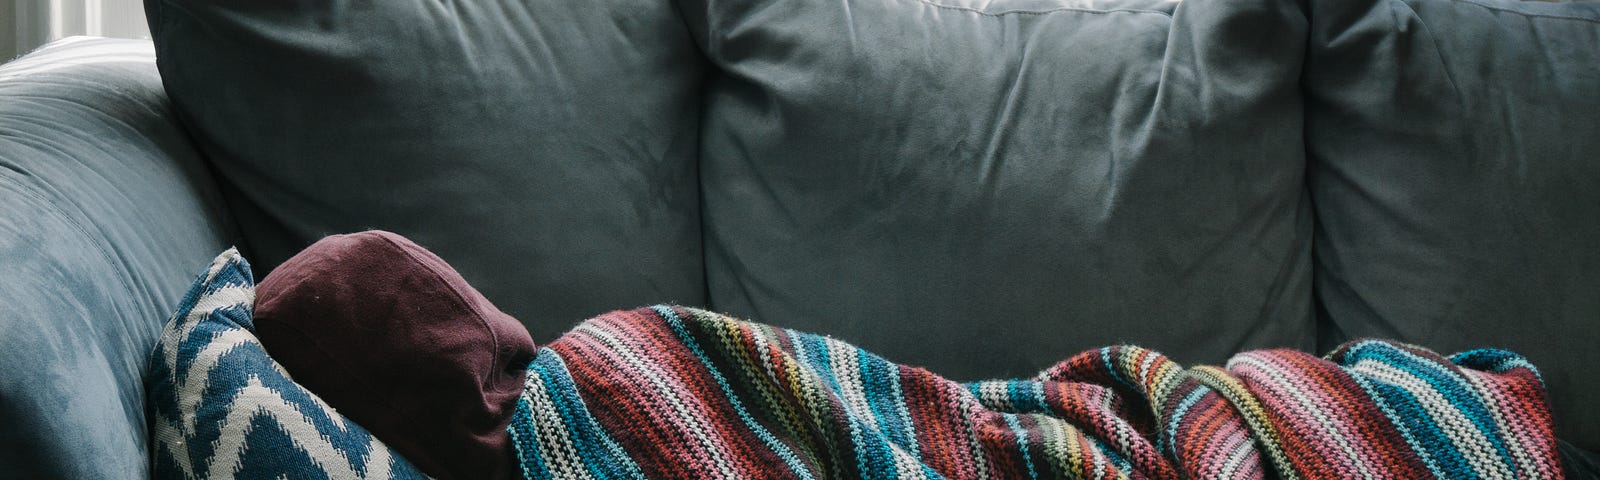 picture of person sleeping on couch